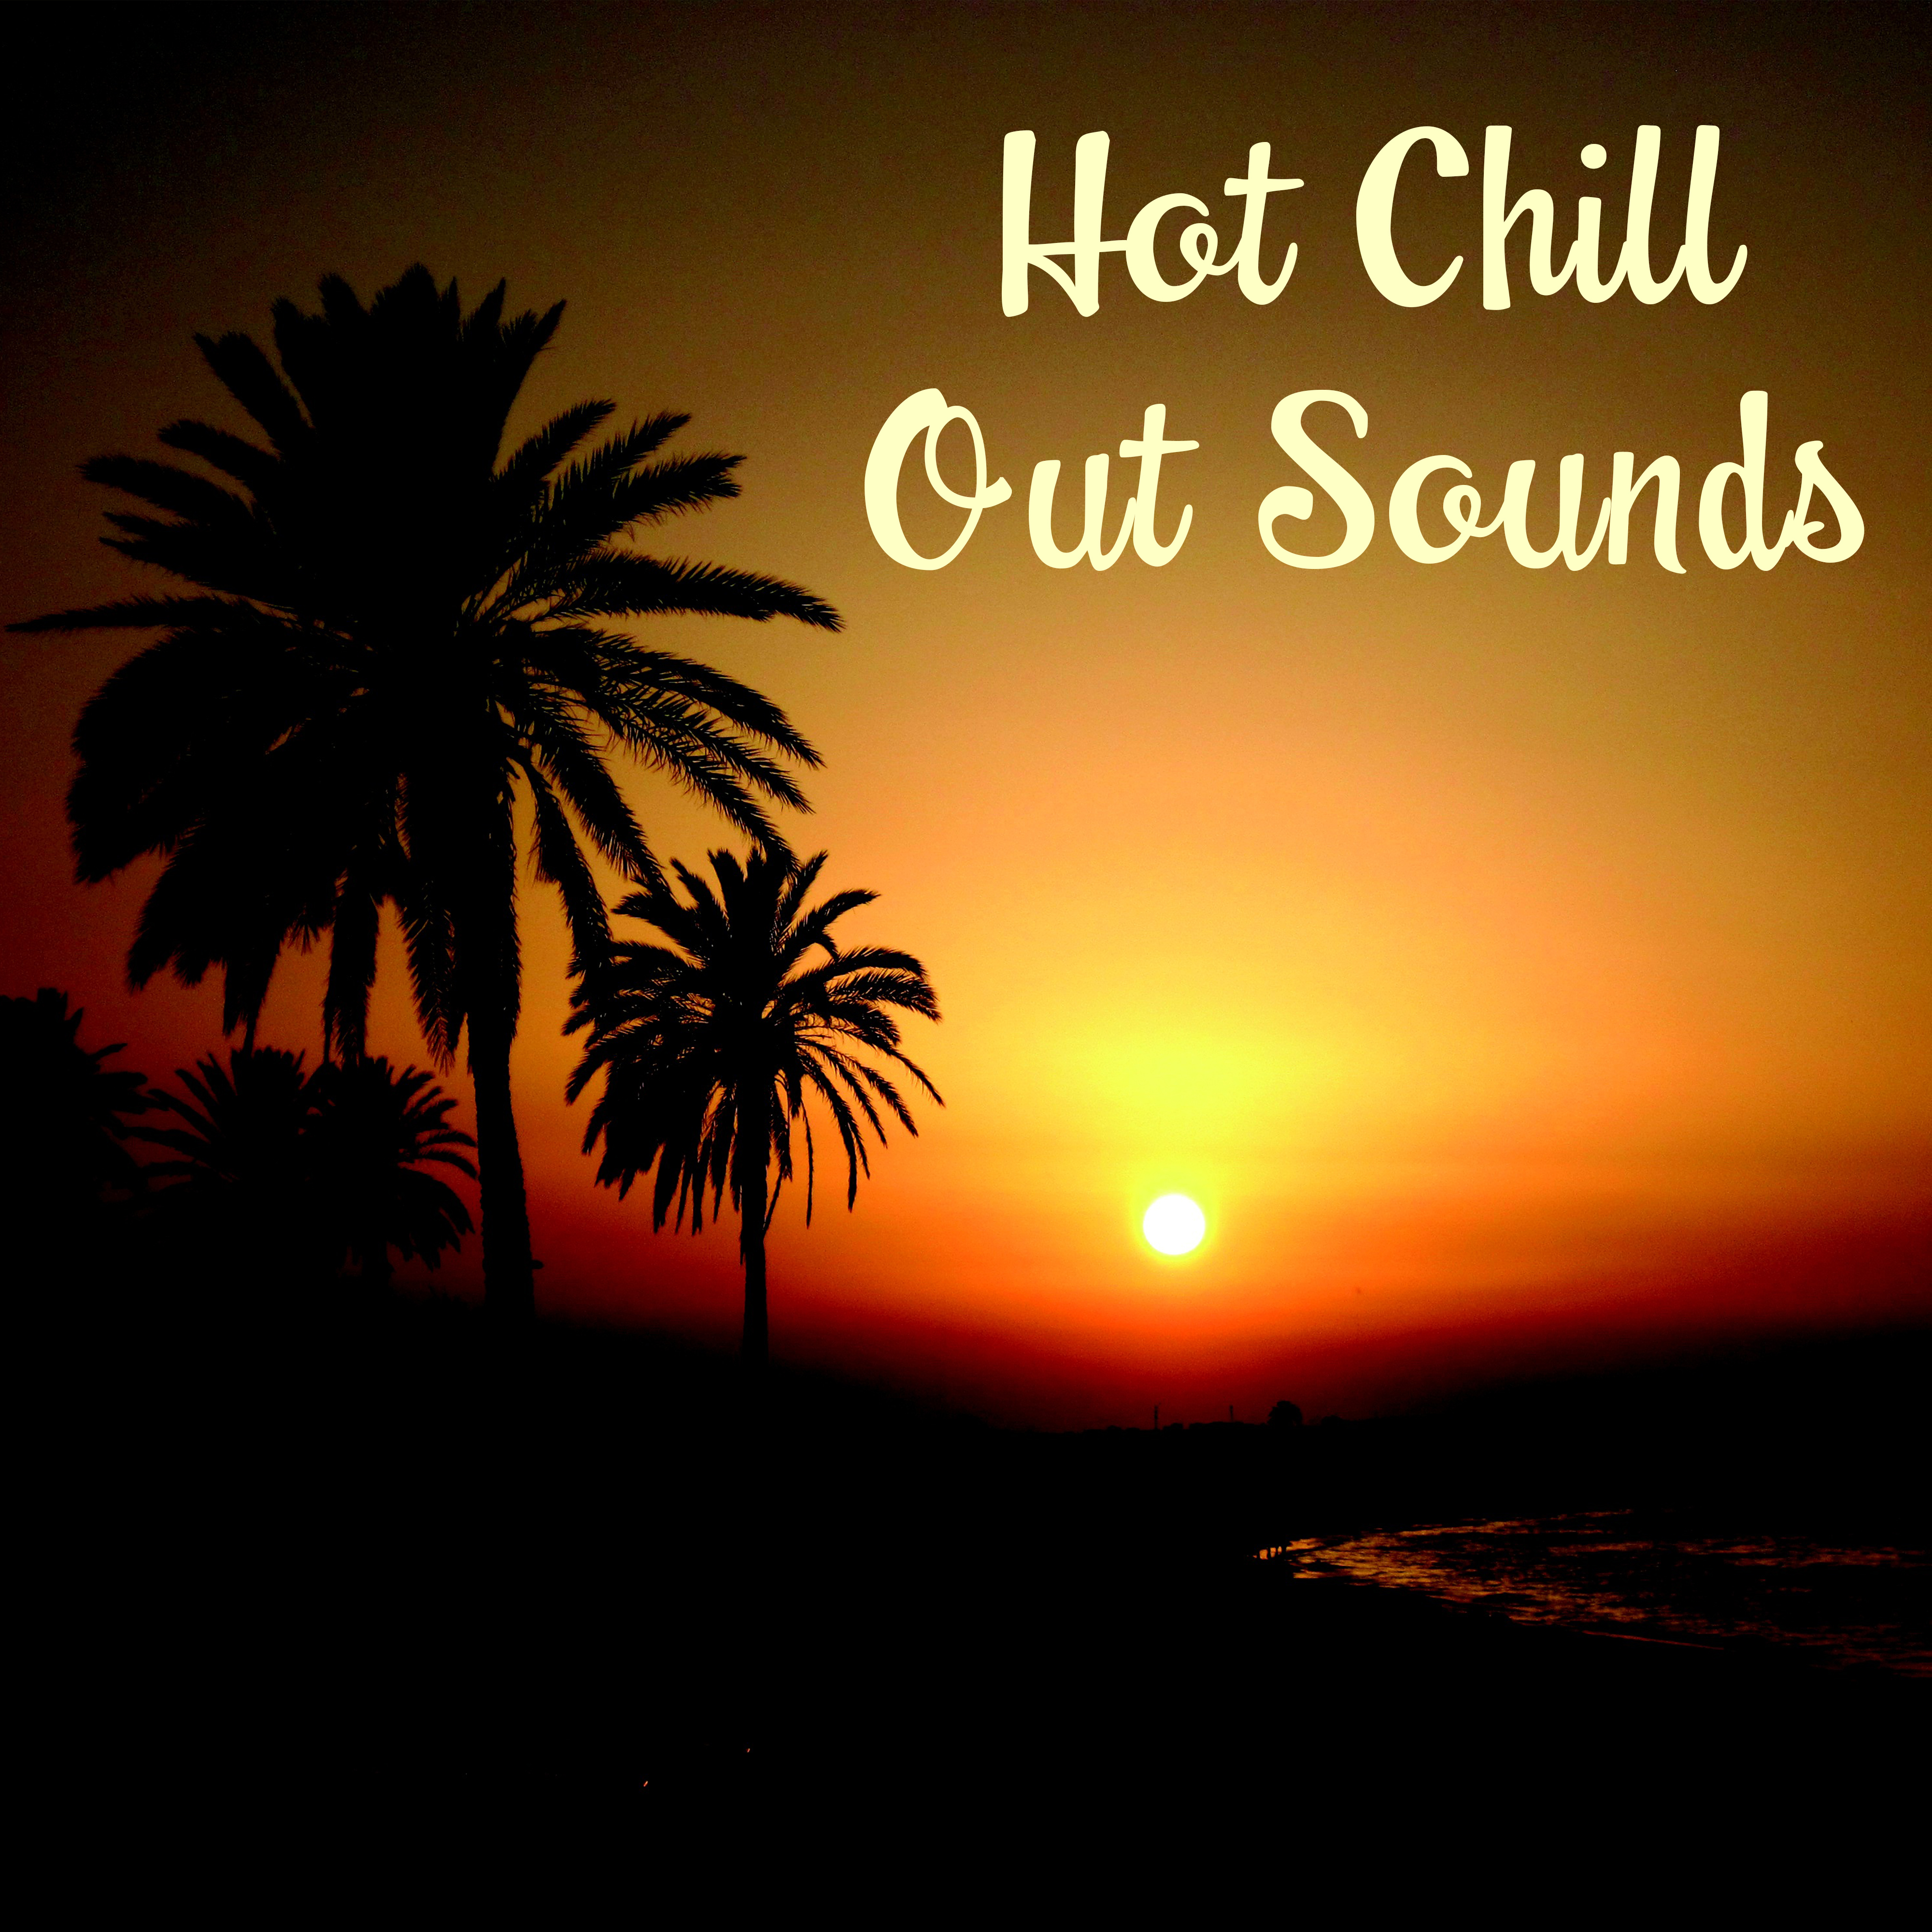 Hot Chill Out Sounds  Chill Out  Vibes, Sensual Music, Sounds for Beach Party, Hot Dance